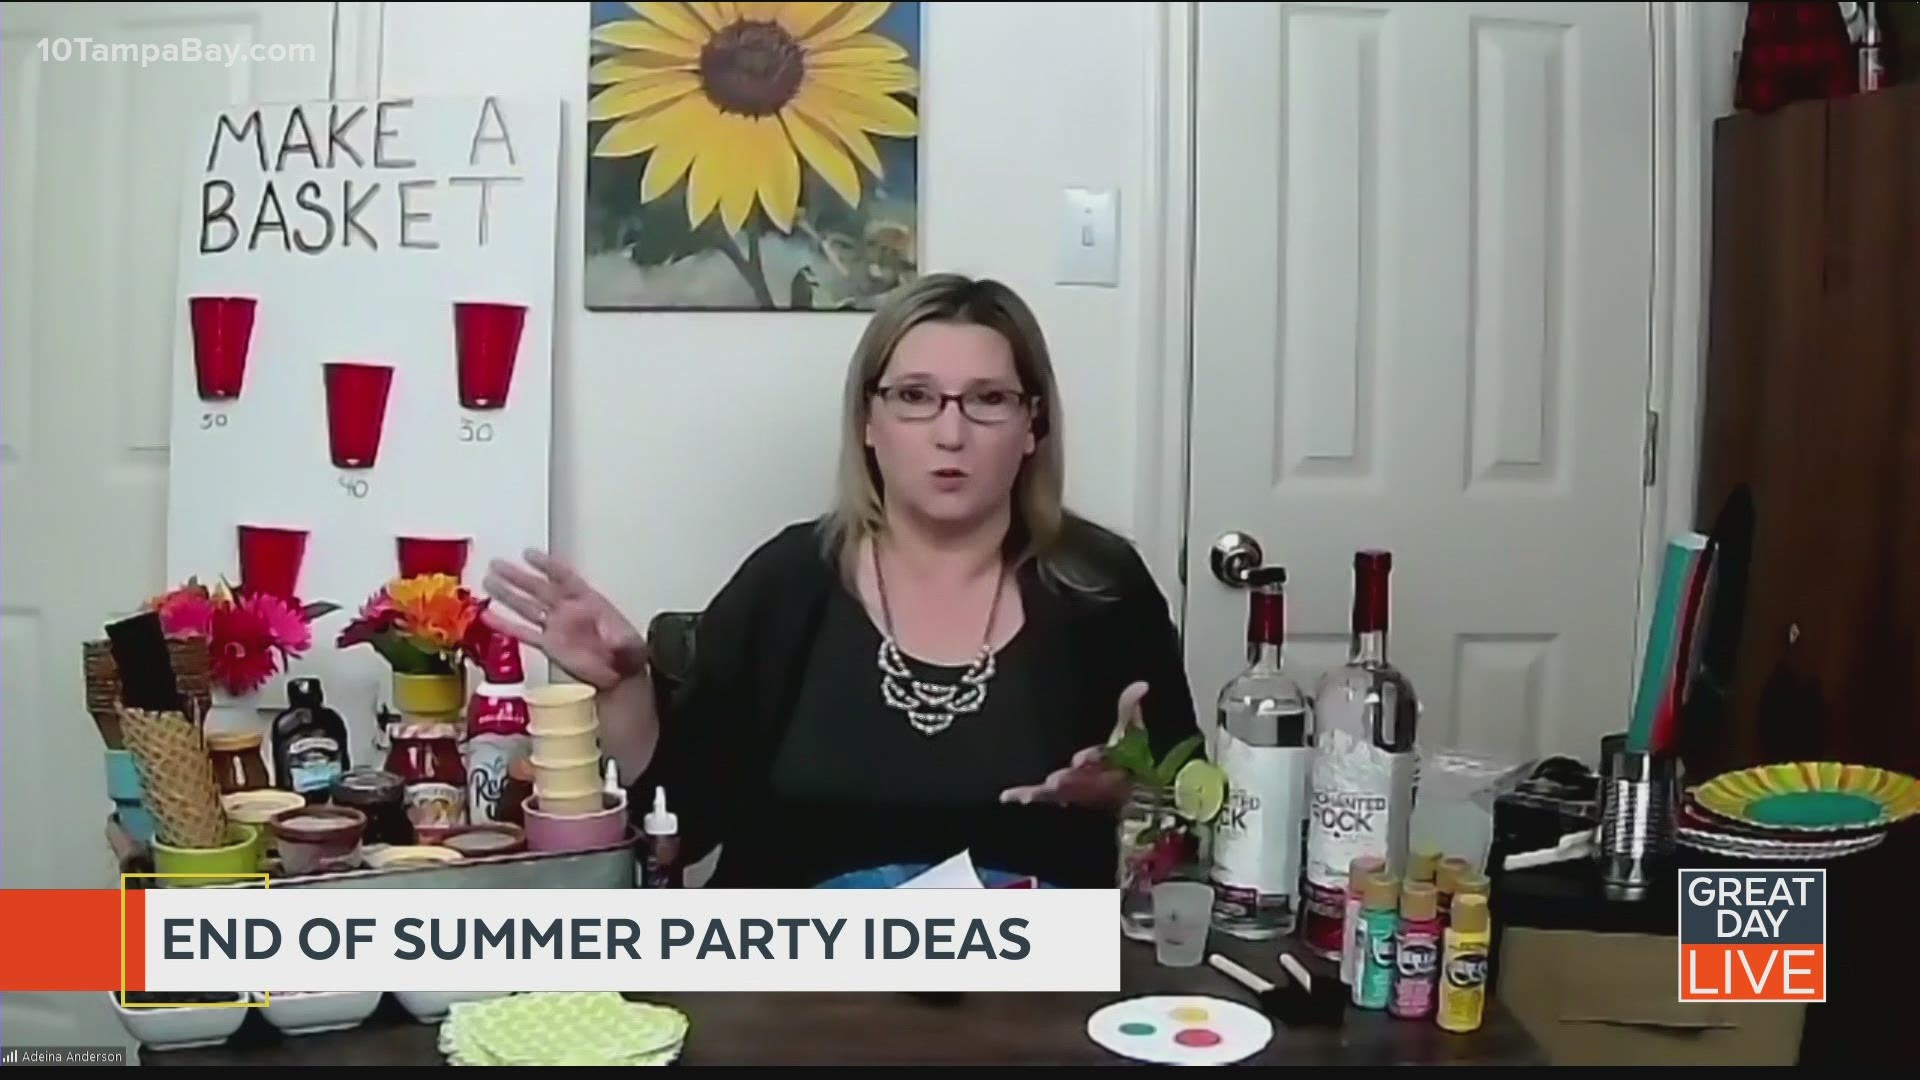 End of summer party ideas